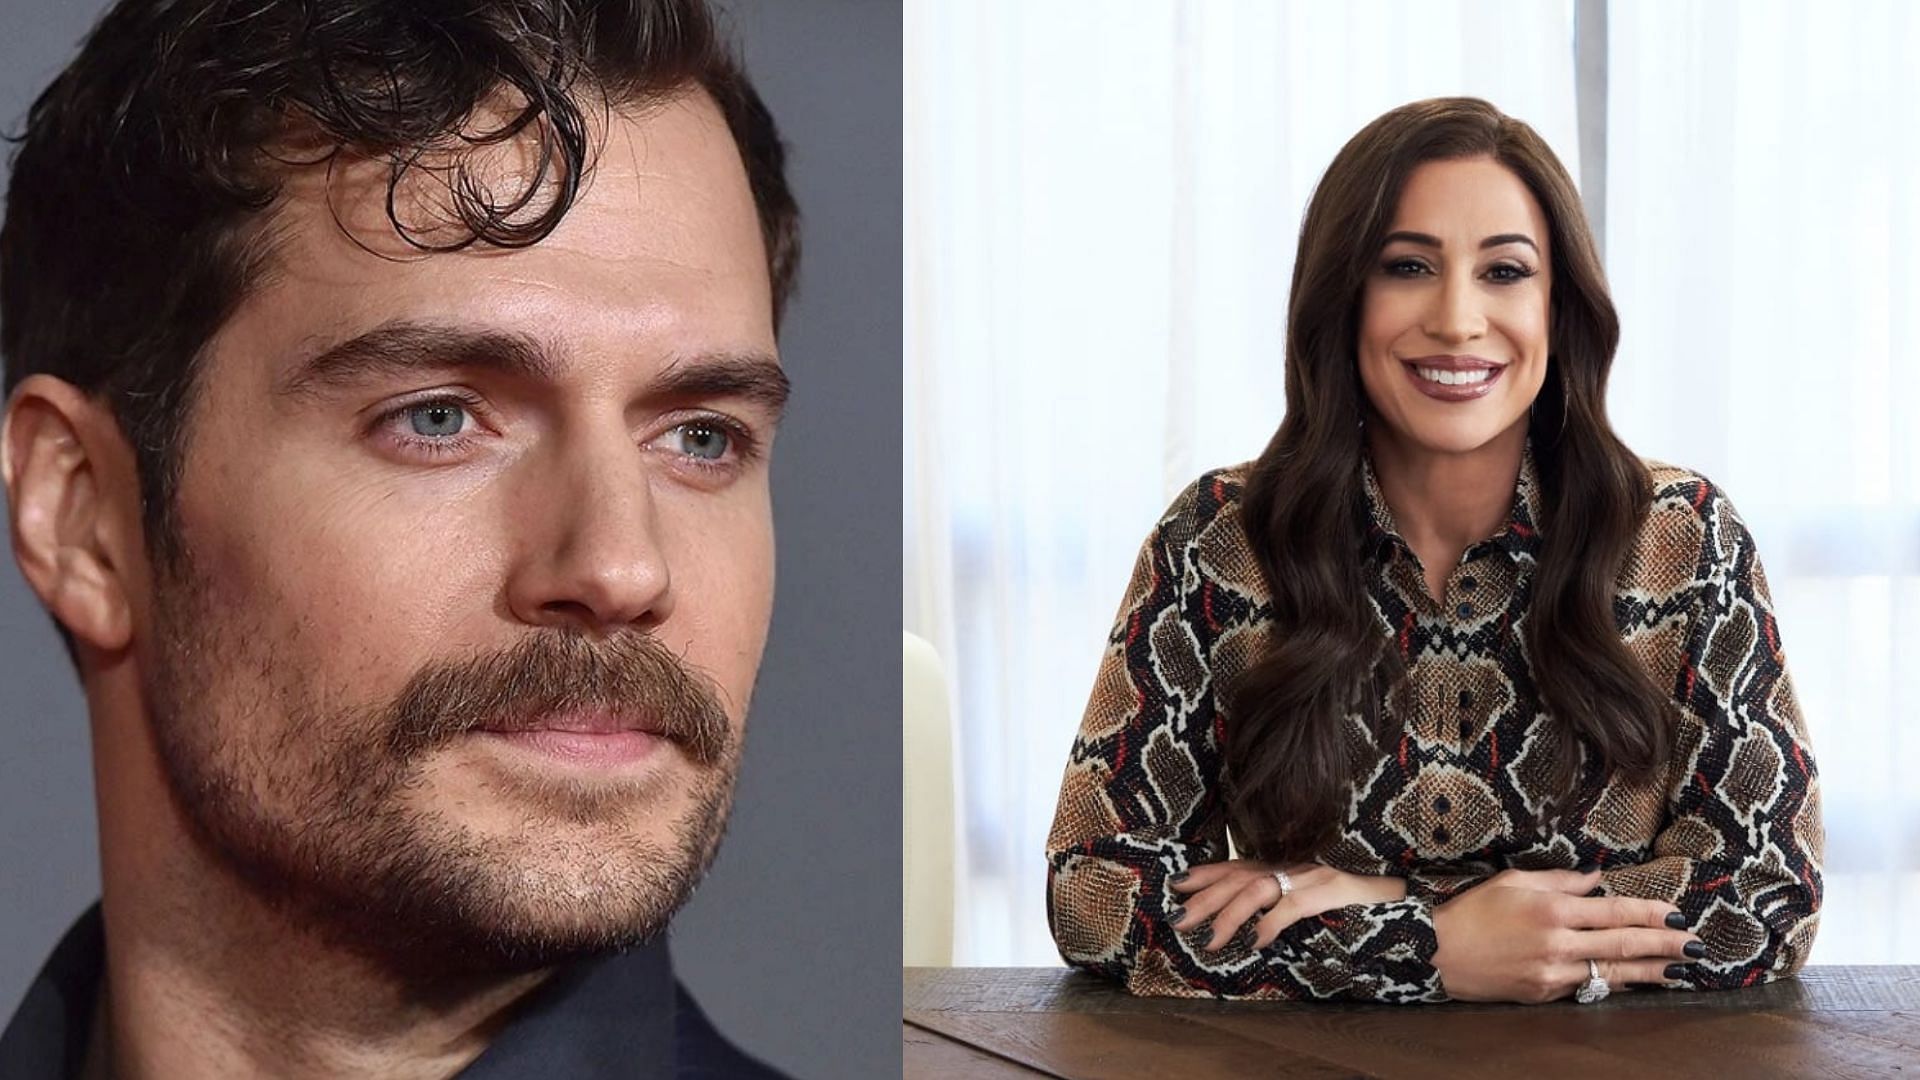 Henry Cavill fires Dwayne Johnson's wife as manager after losing